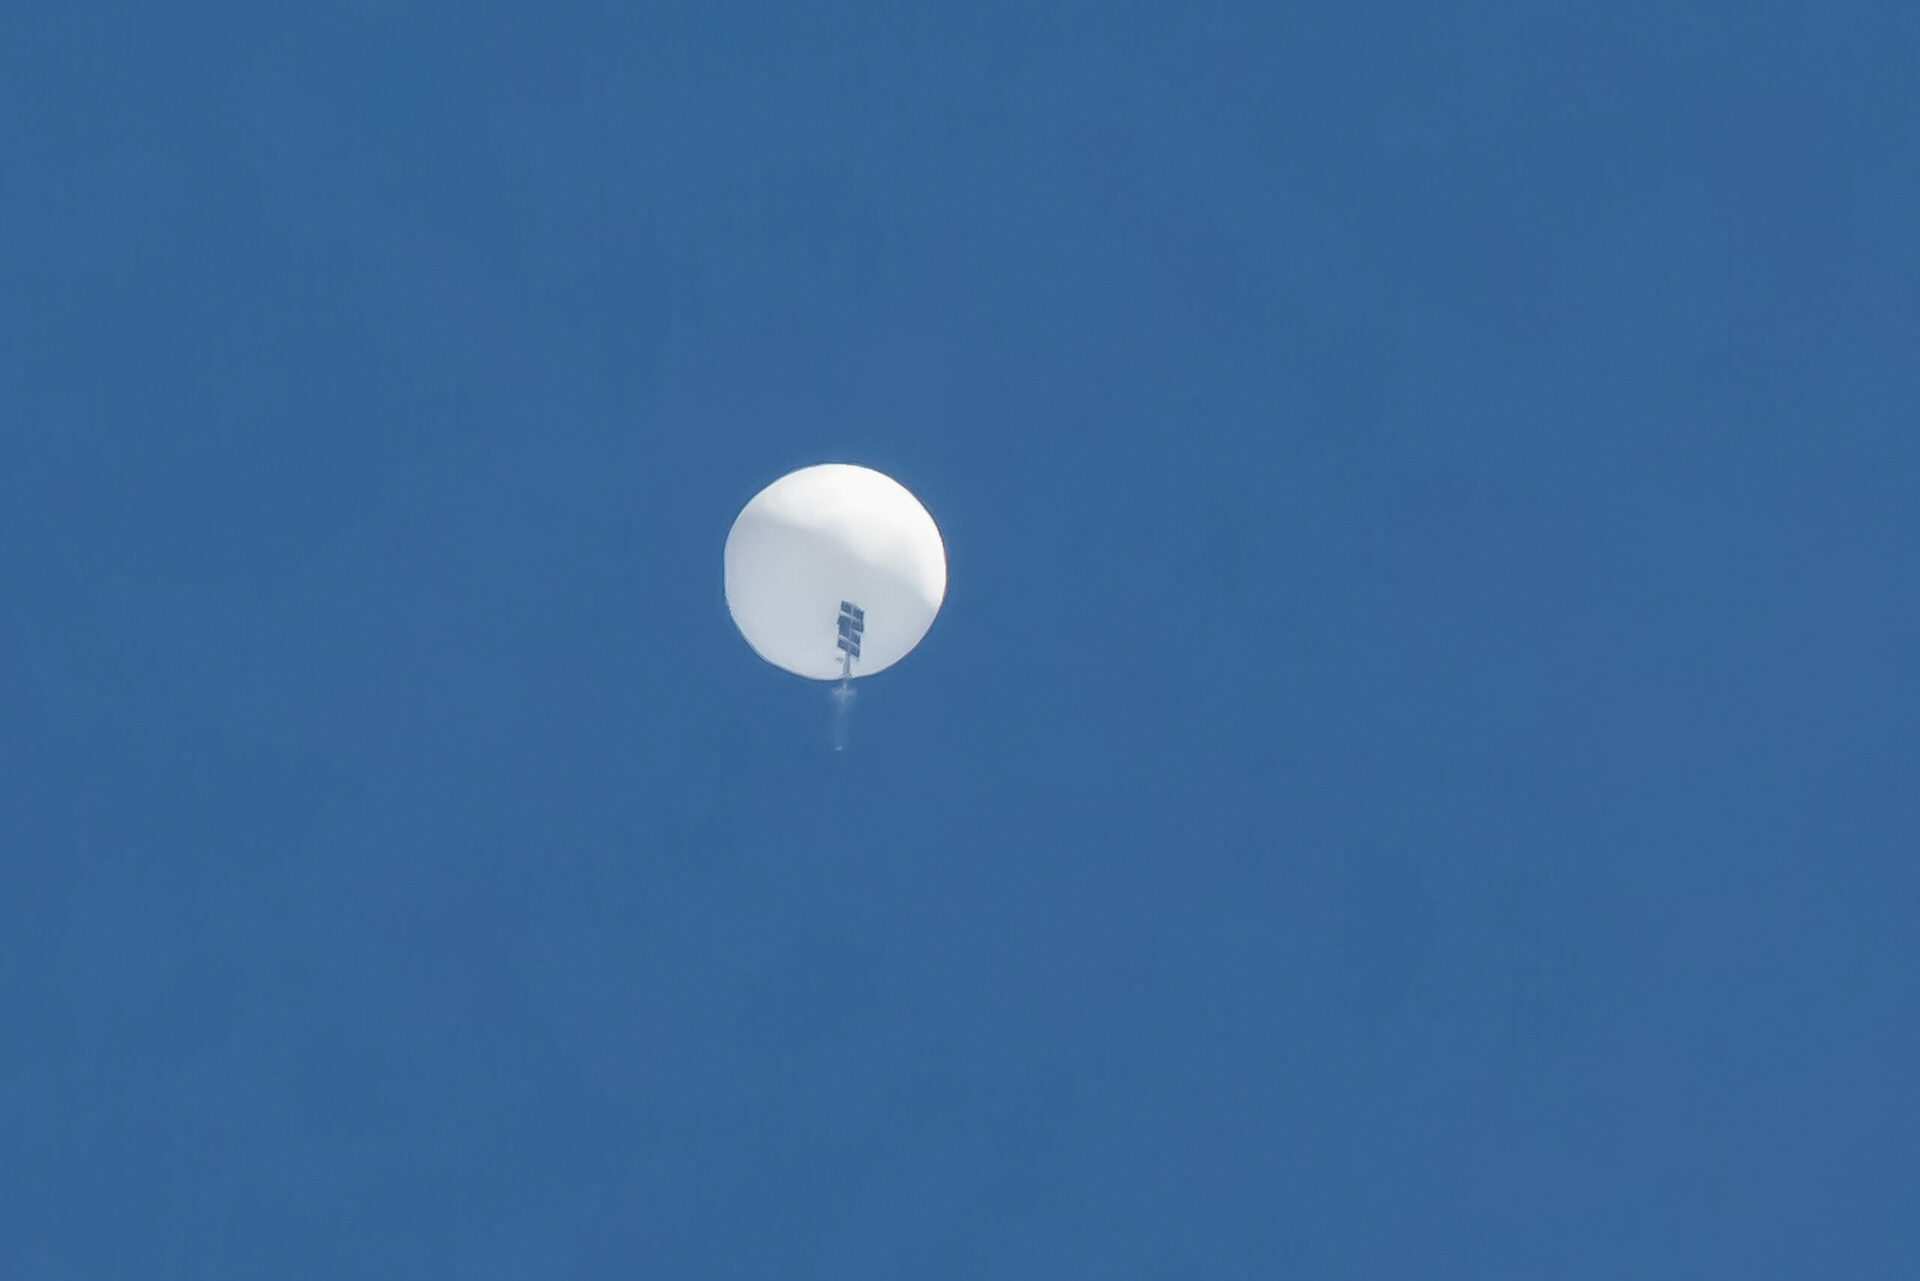 Military leaders defend response to Chinese spy balloon when pressed by Collins